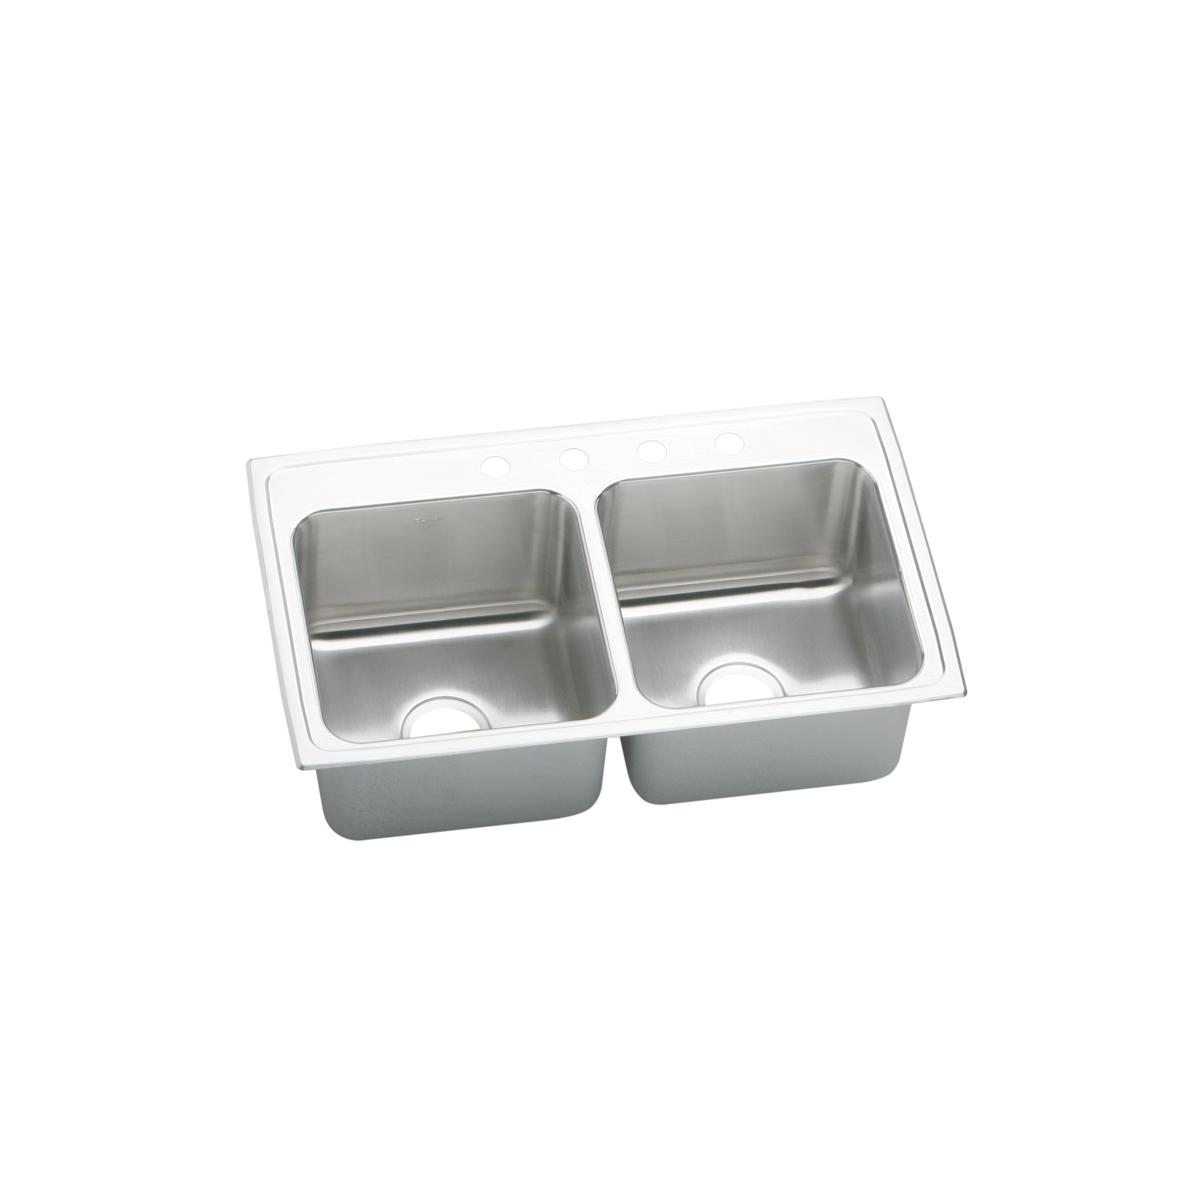 lustertone equal double bowl drop-in sink